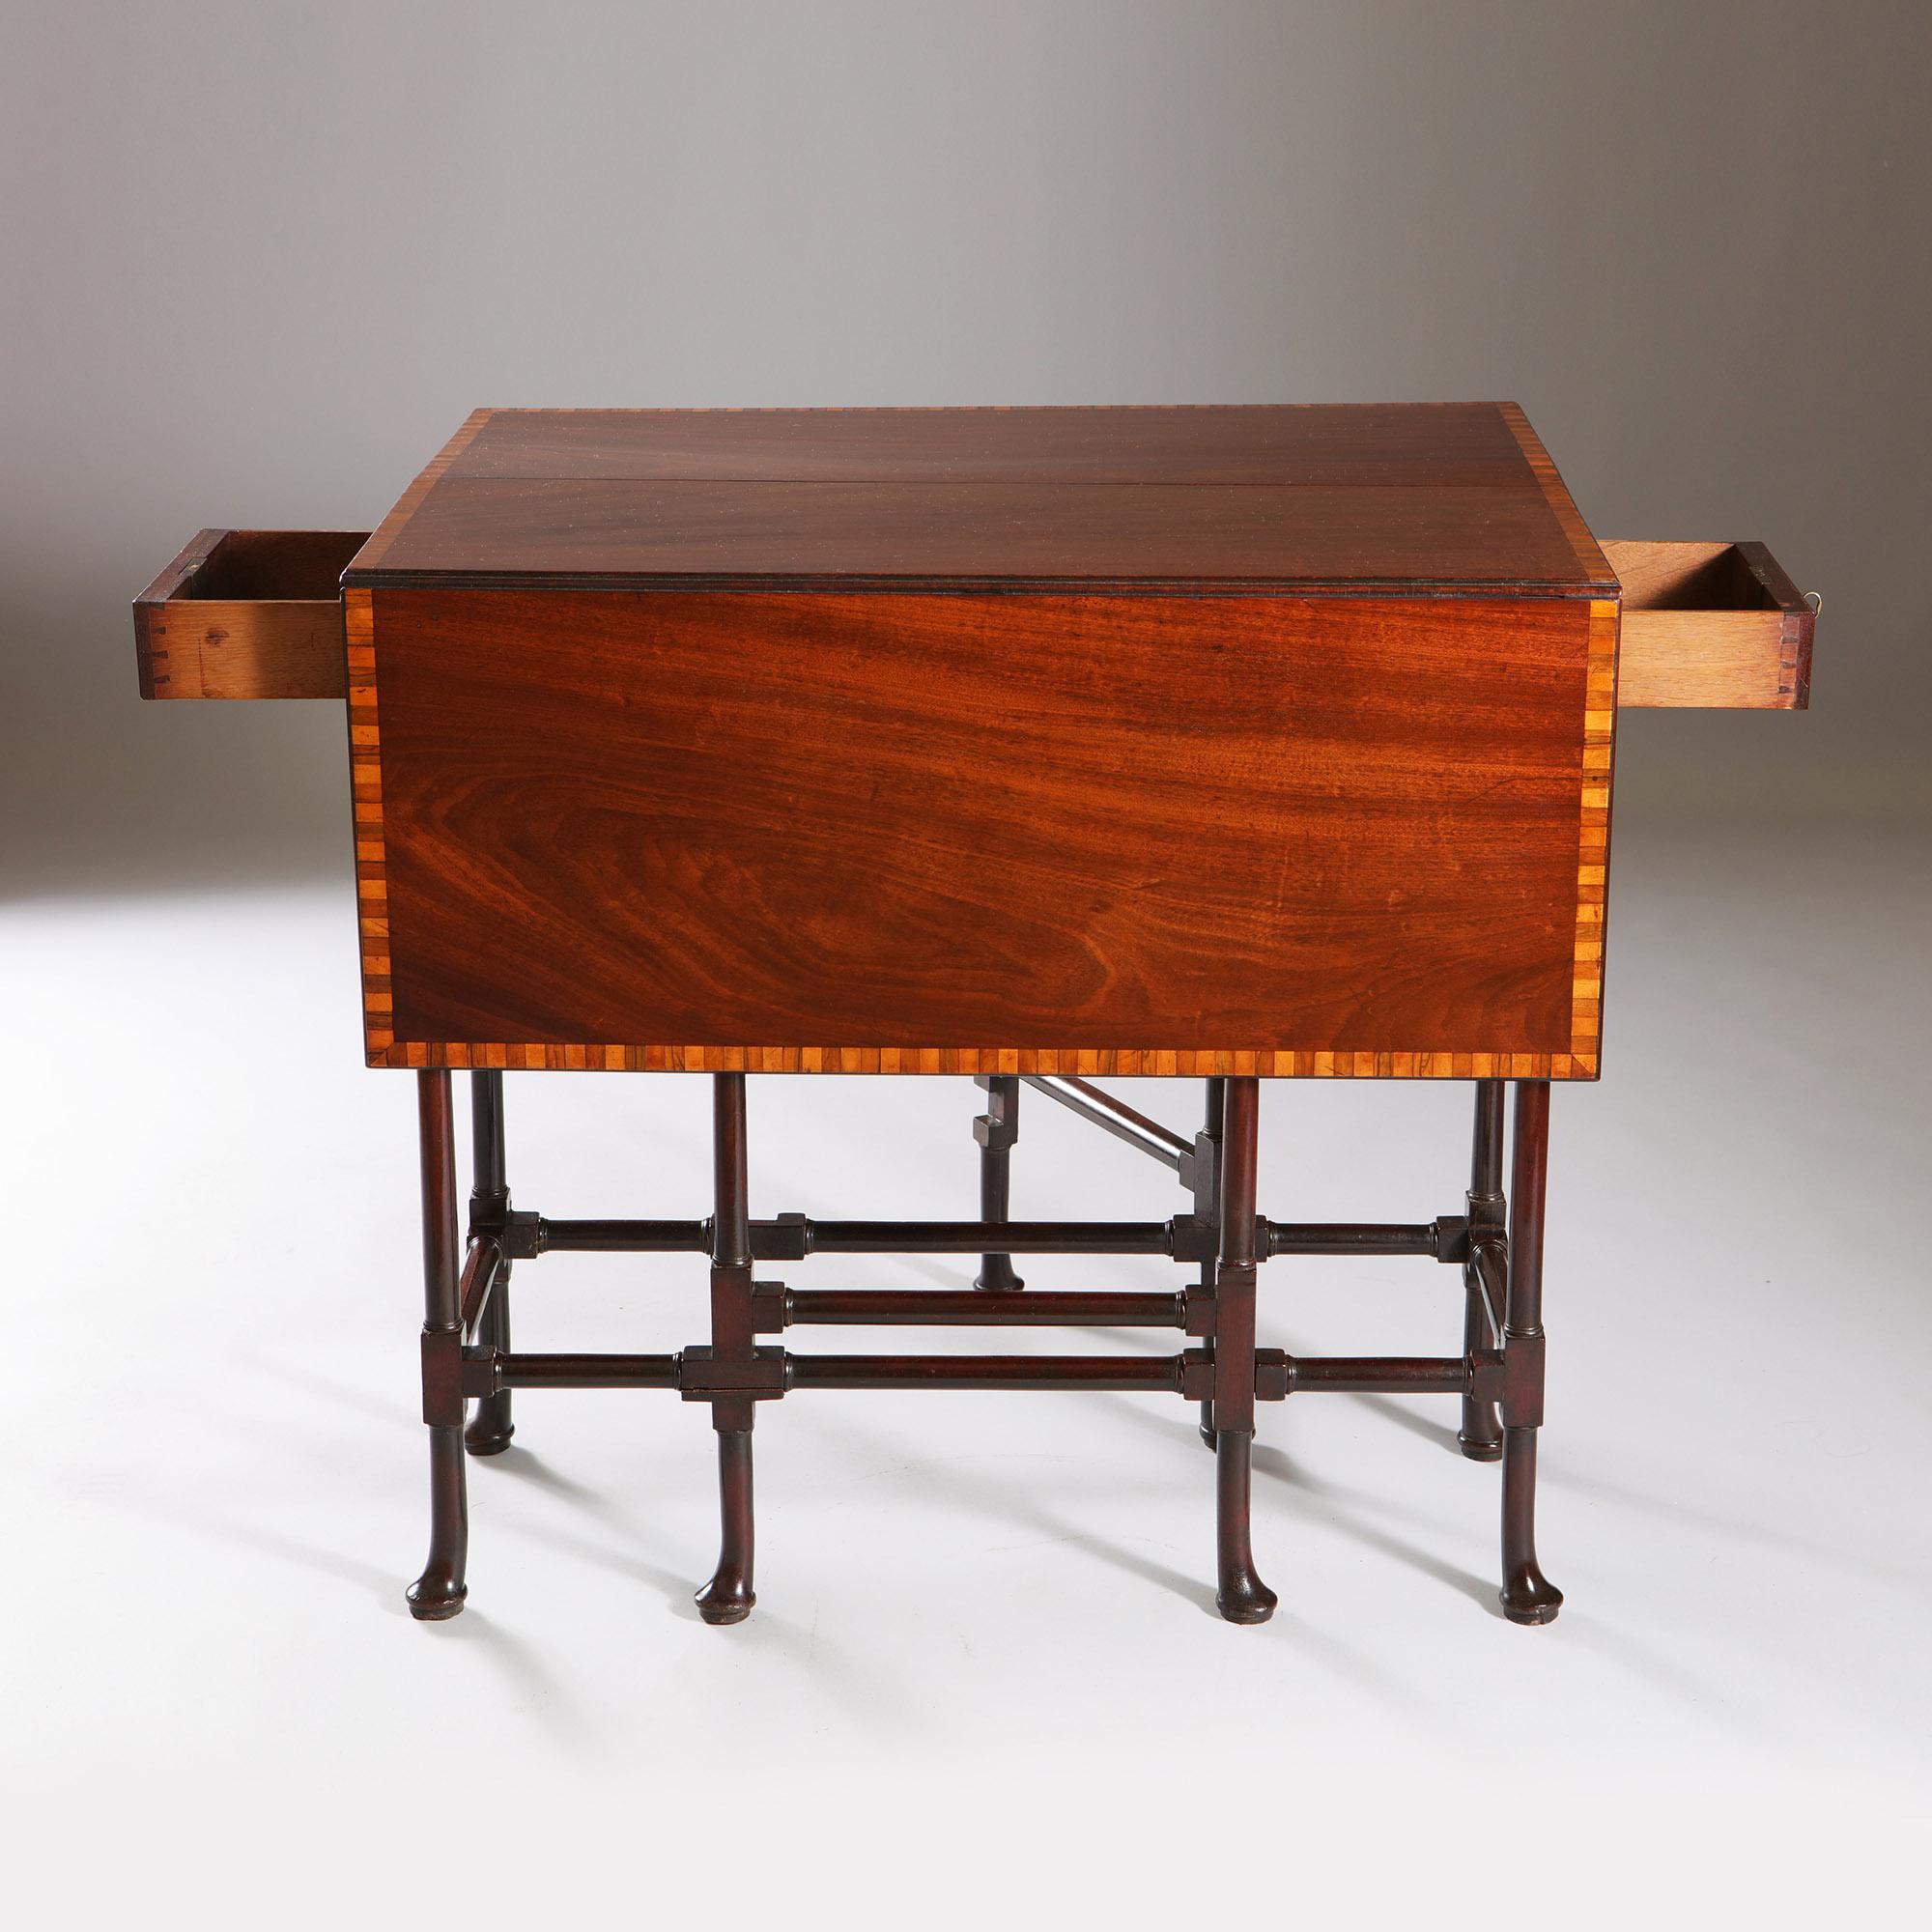 Mahogany A George III mahogany spider-leg table attributed to Thomas Chippendale 1768 For Sale